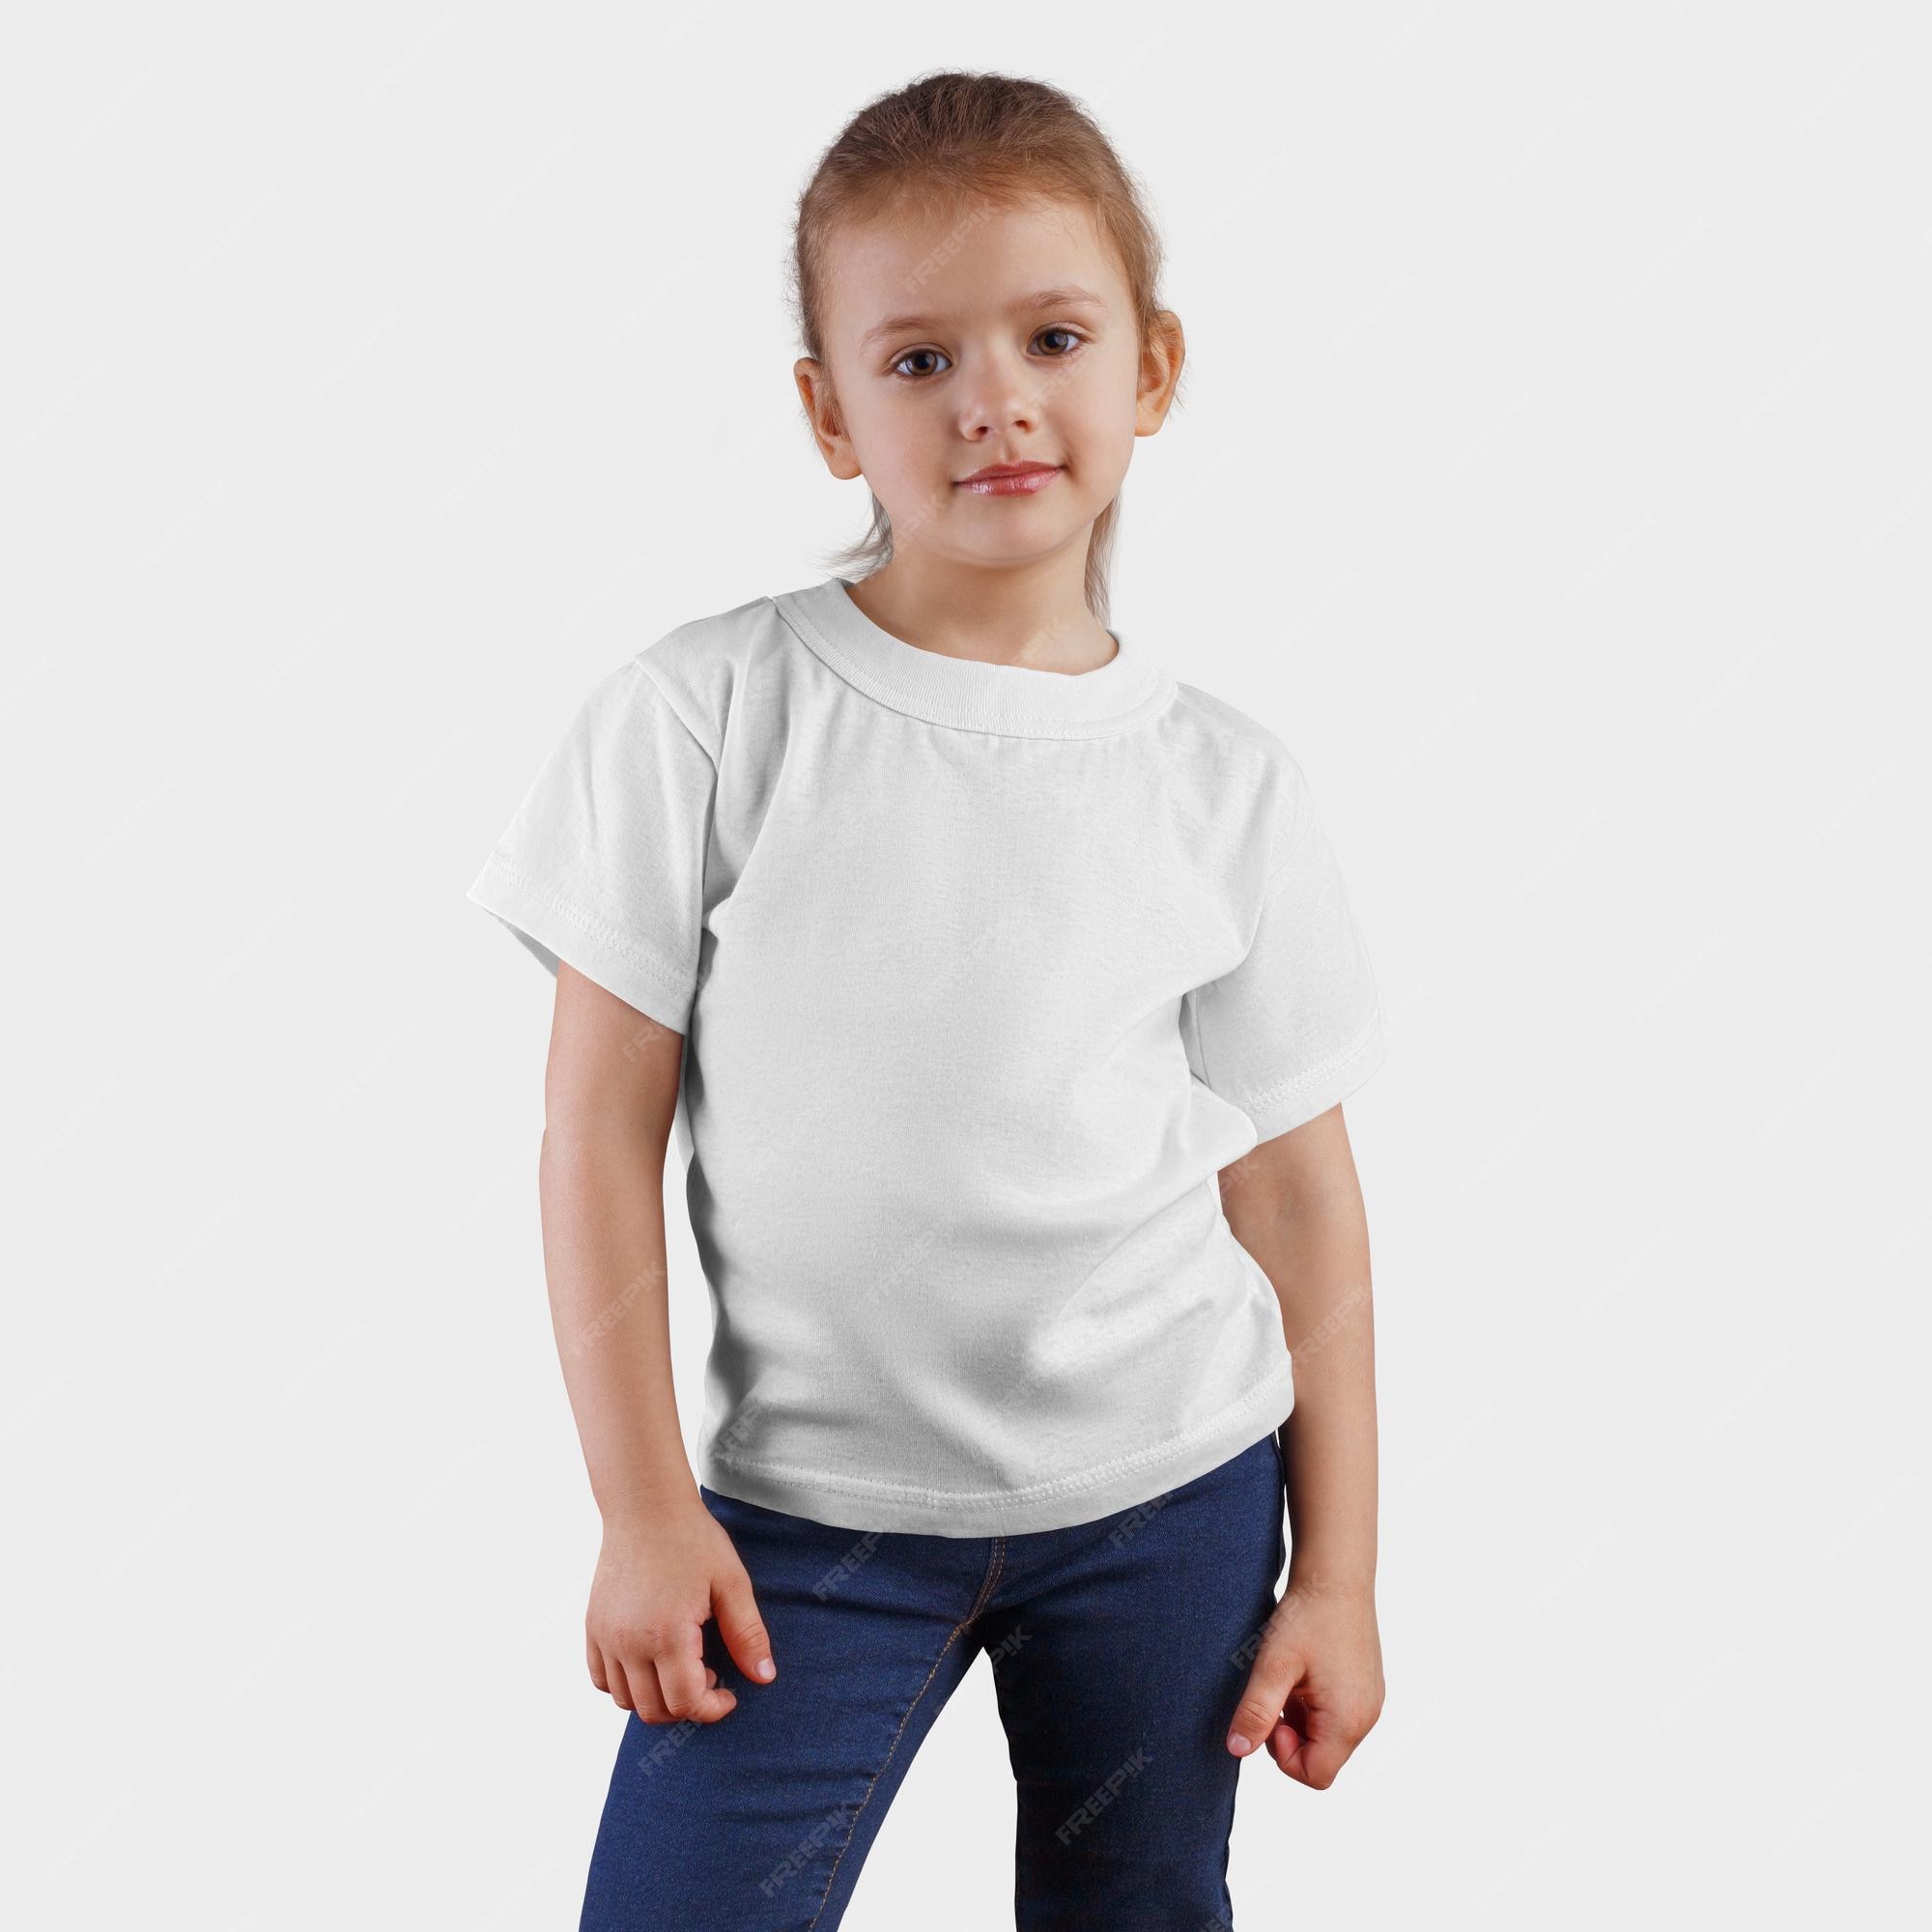 Premium Photo | White tshirt on a in blue jeans and a hand on the waist clothes on a child